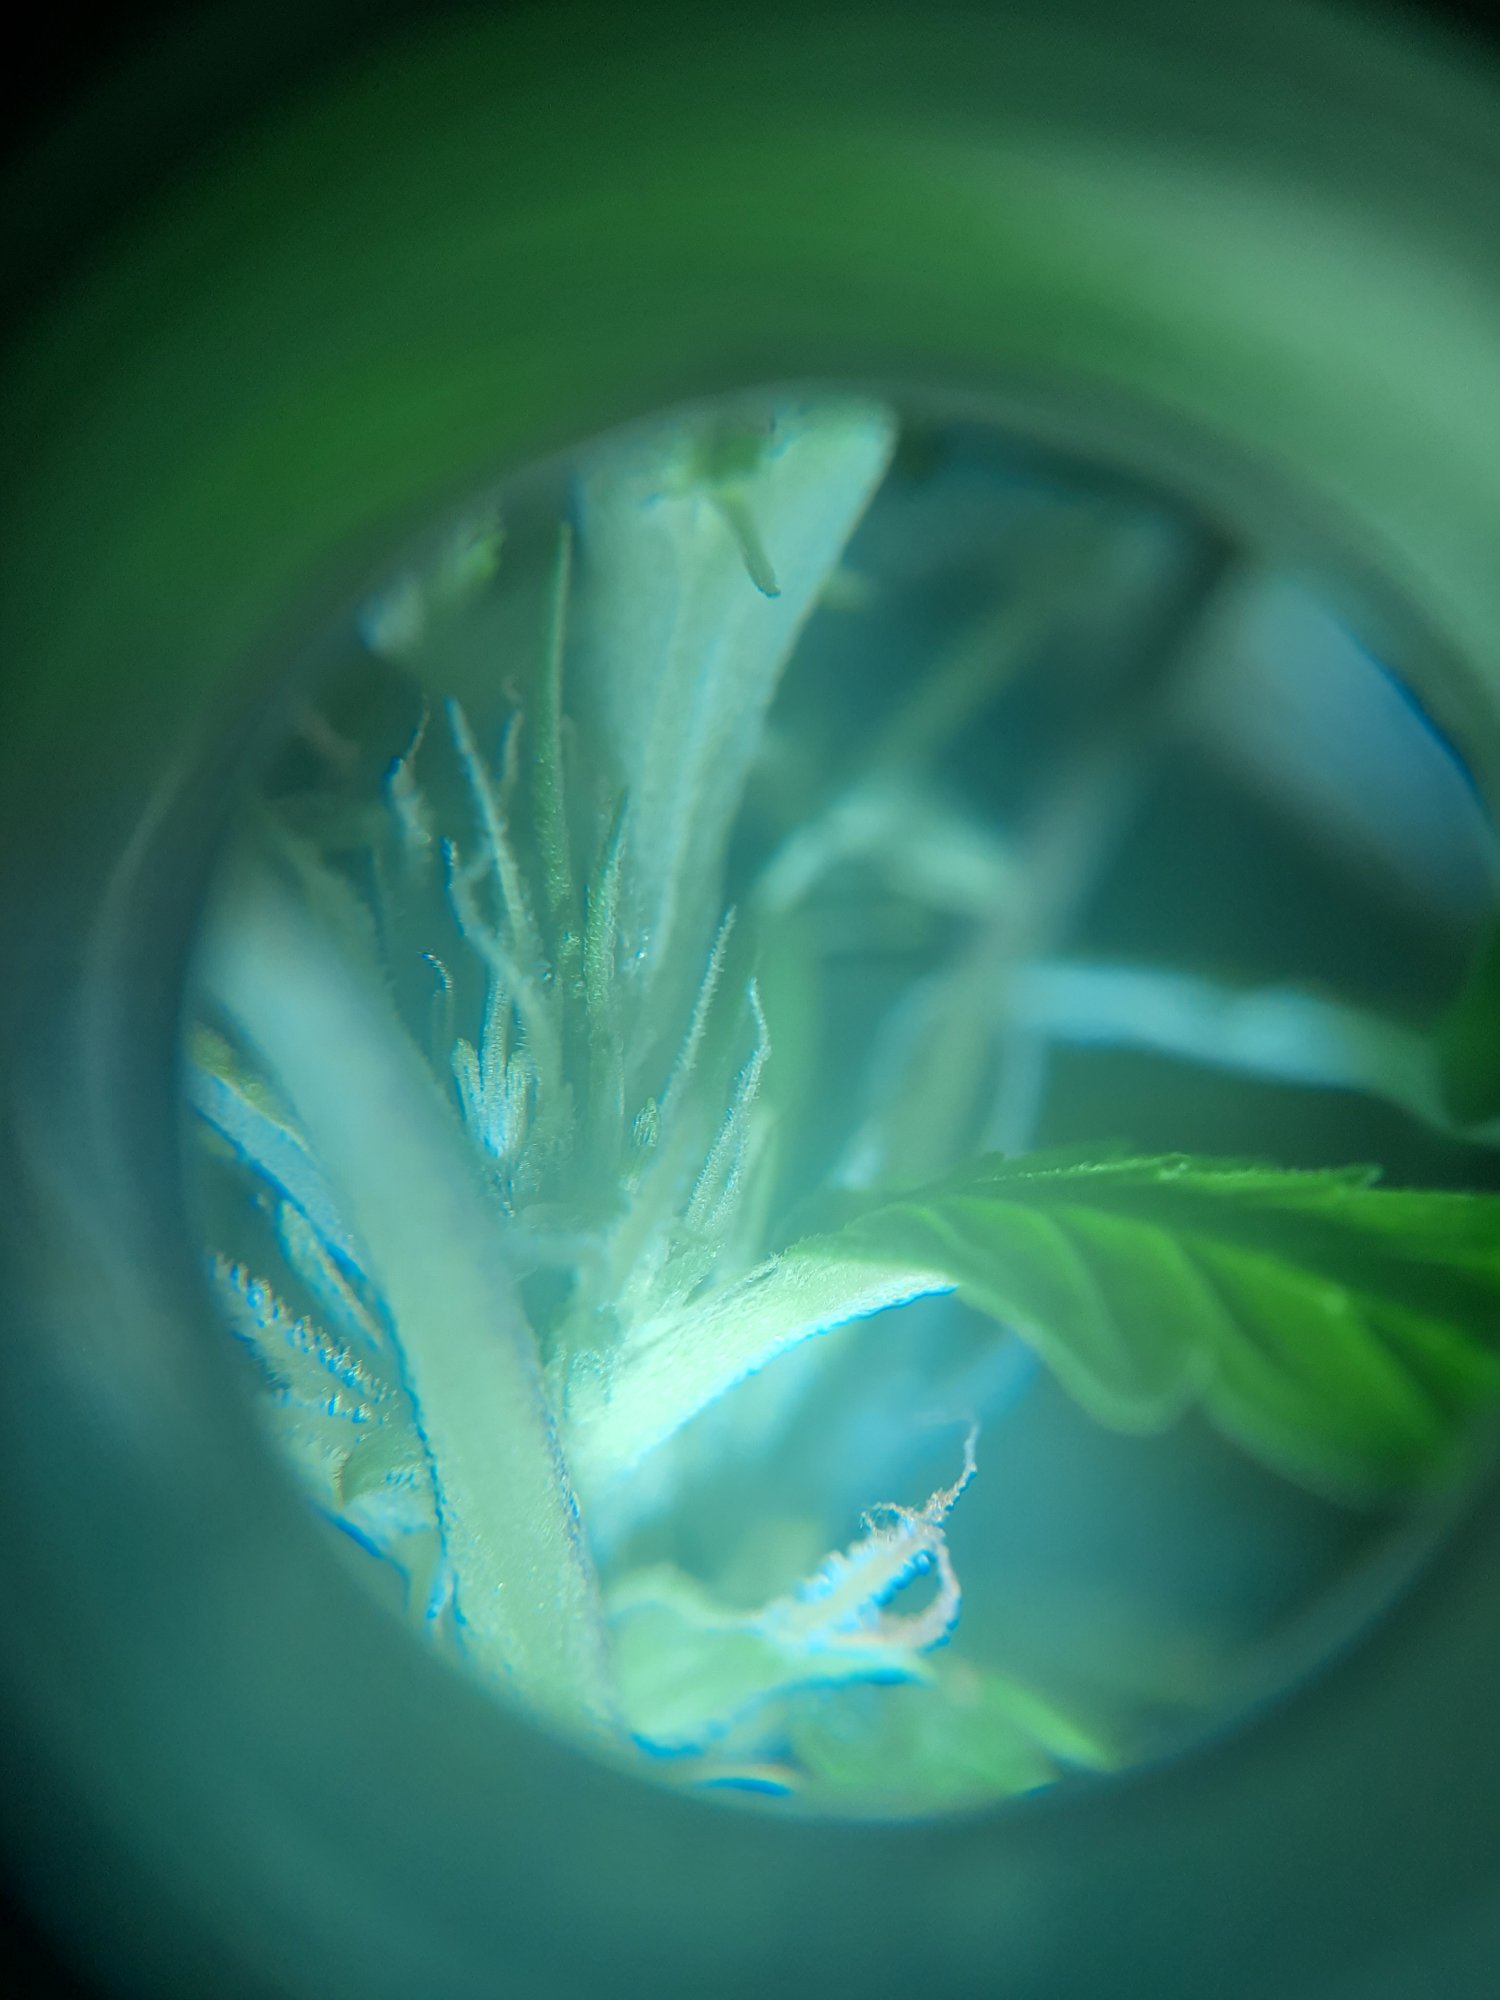 Is my plant starting into its flowering stage 5